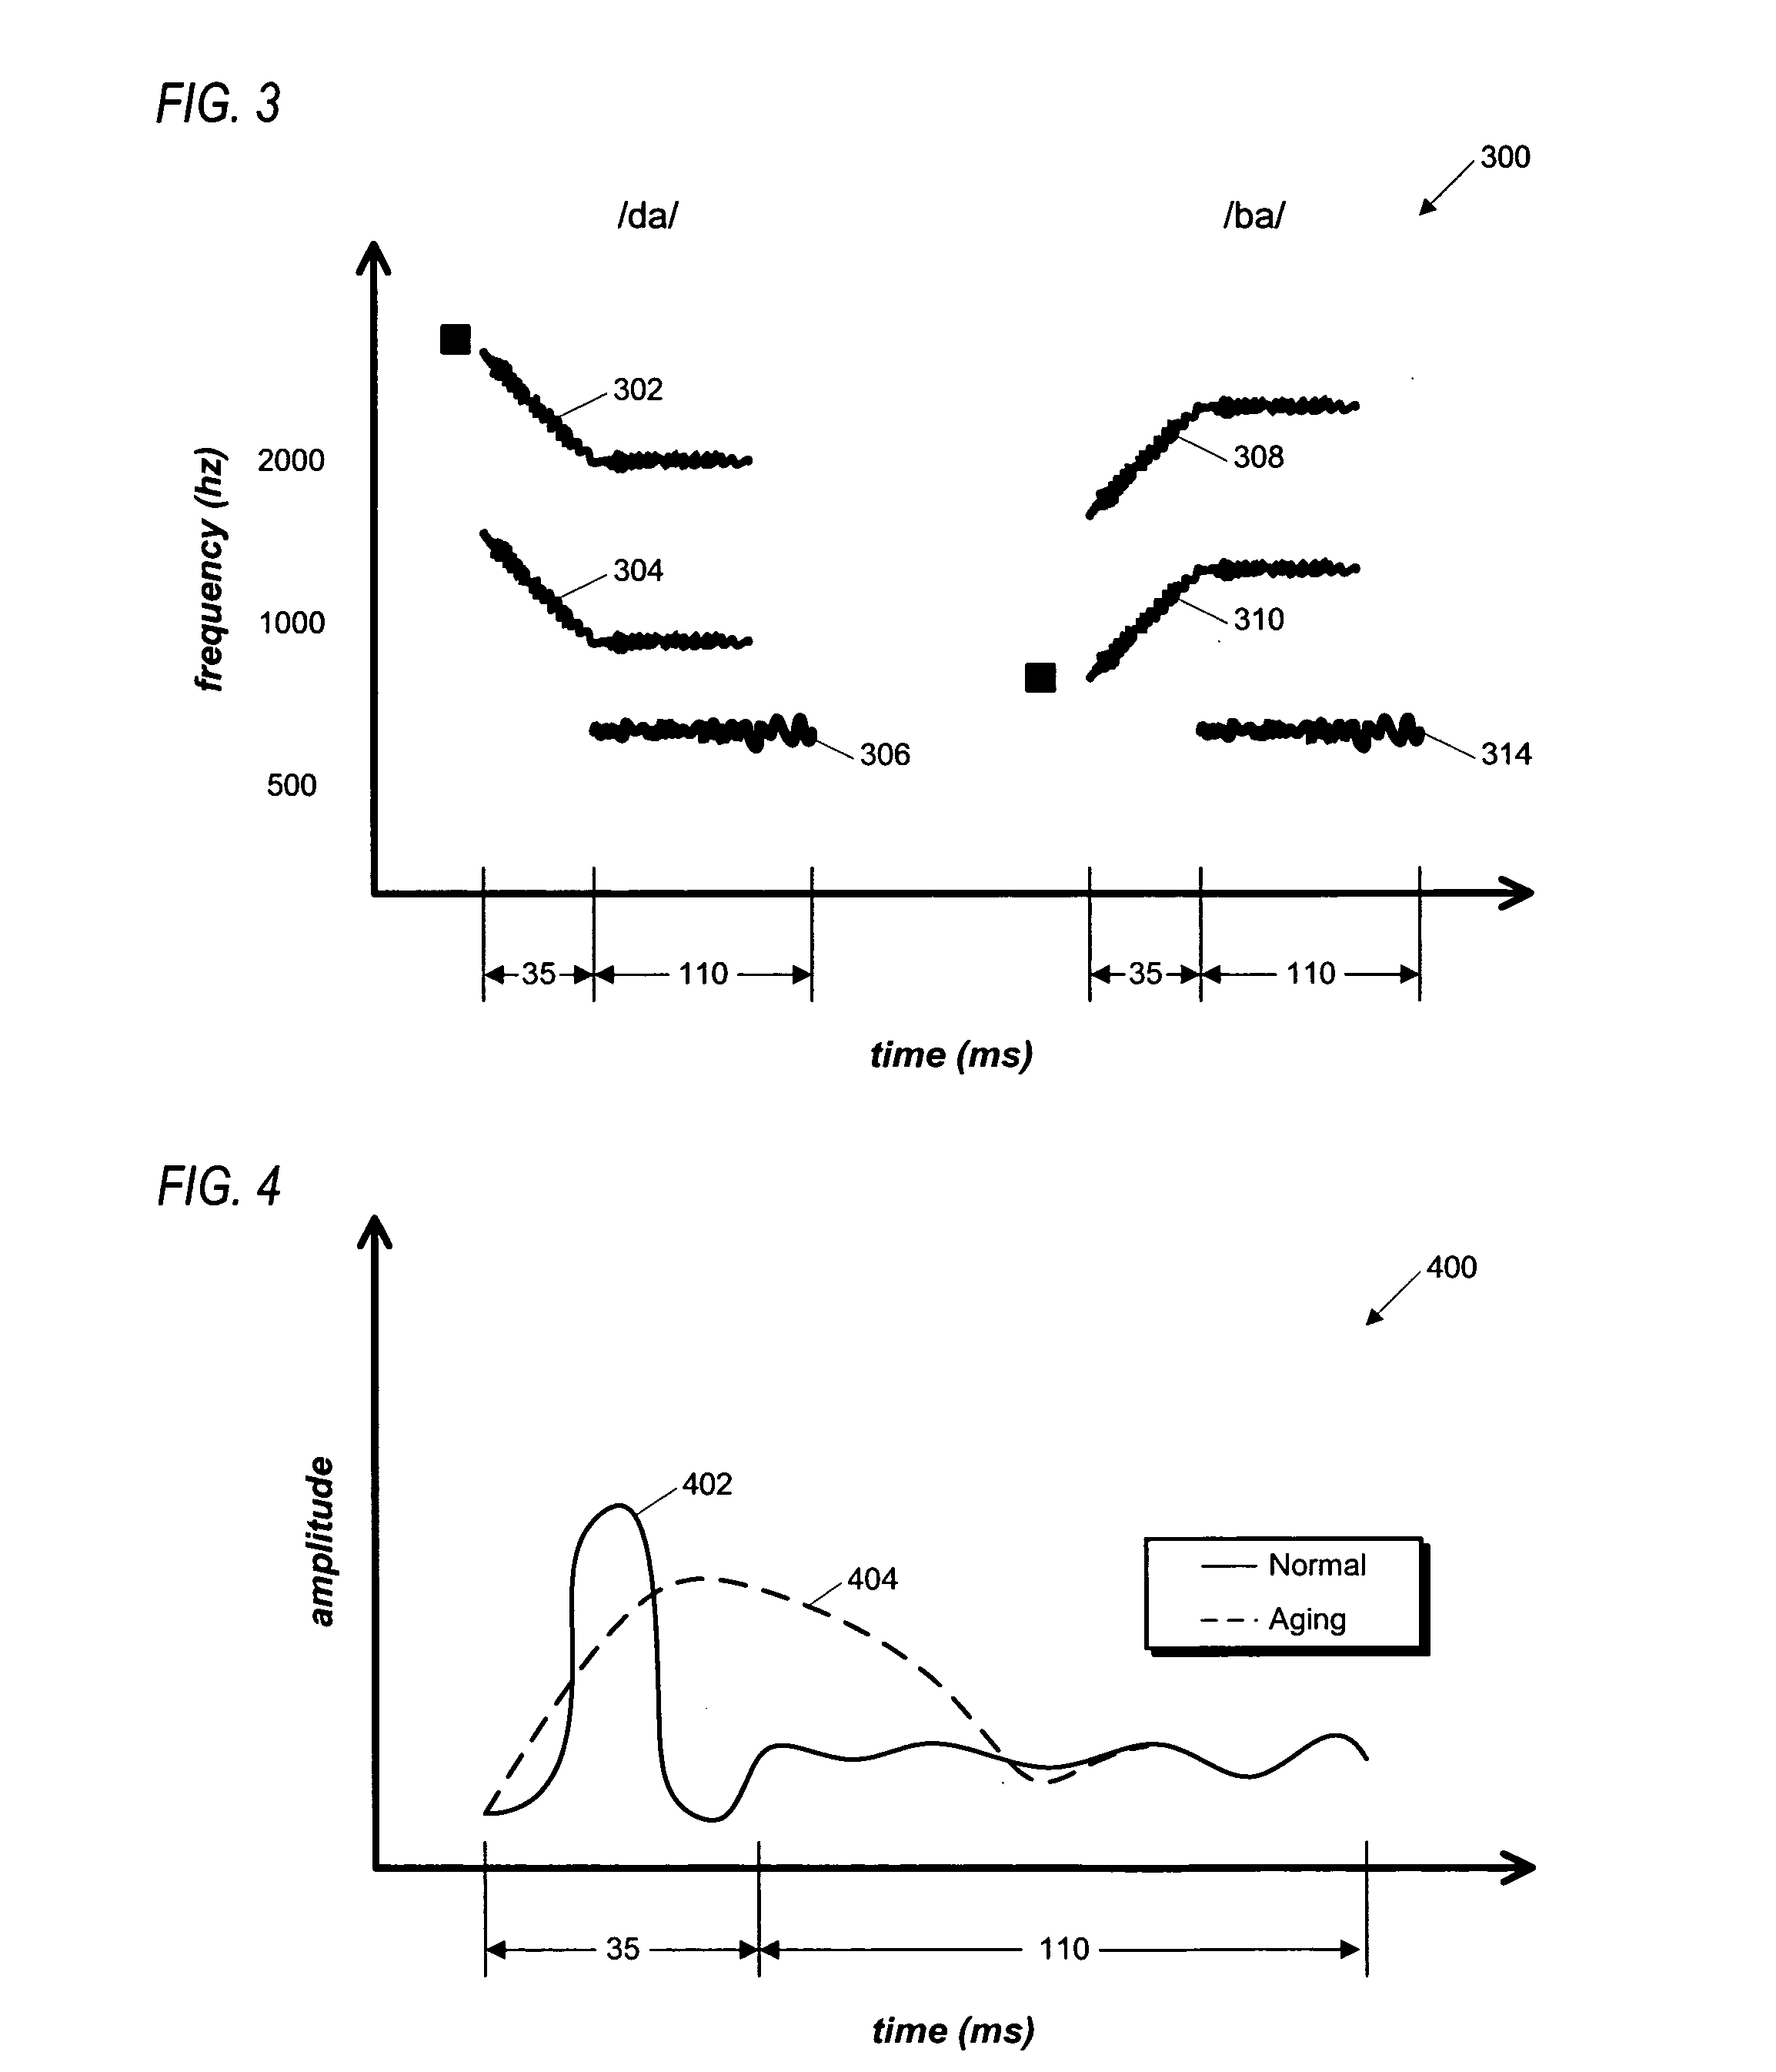 Method for enhancing memory and cognition in aging adults